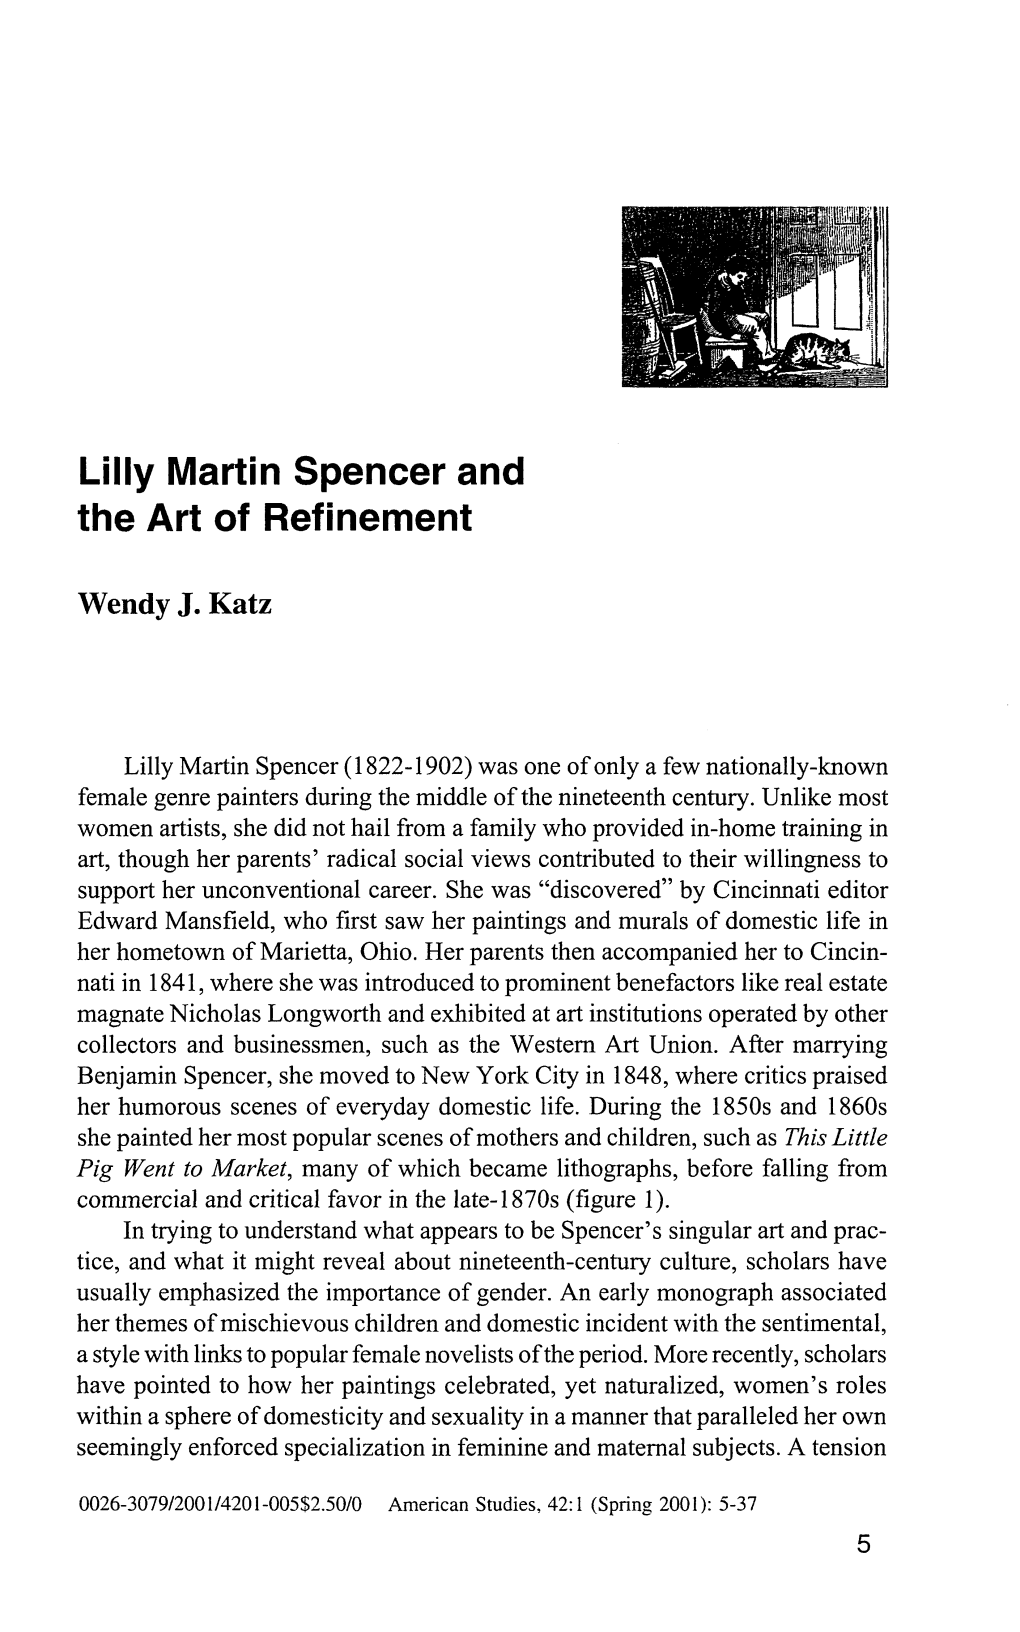 Lilly Martin Spencer and the Art of Refinement